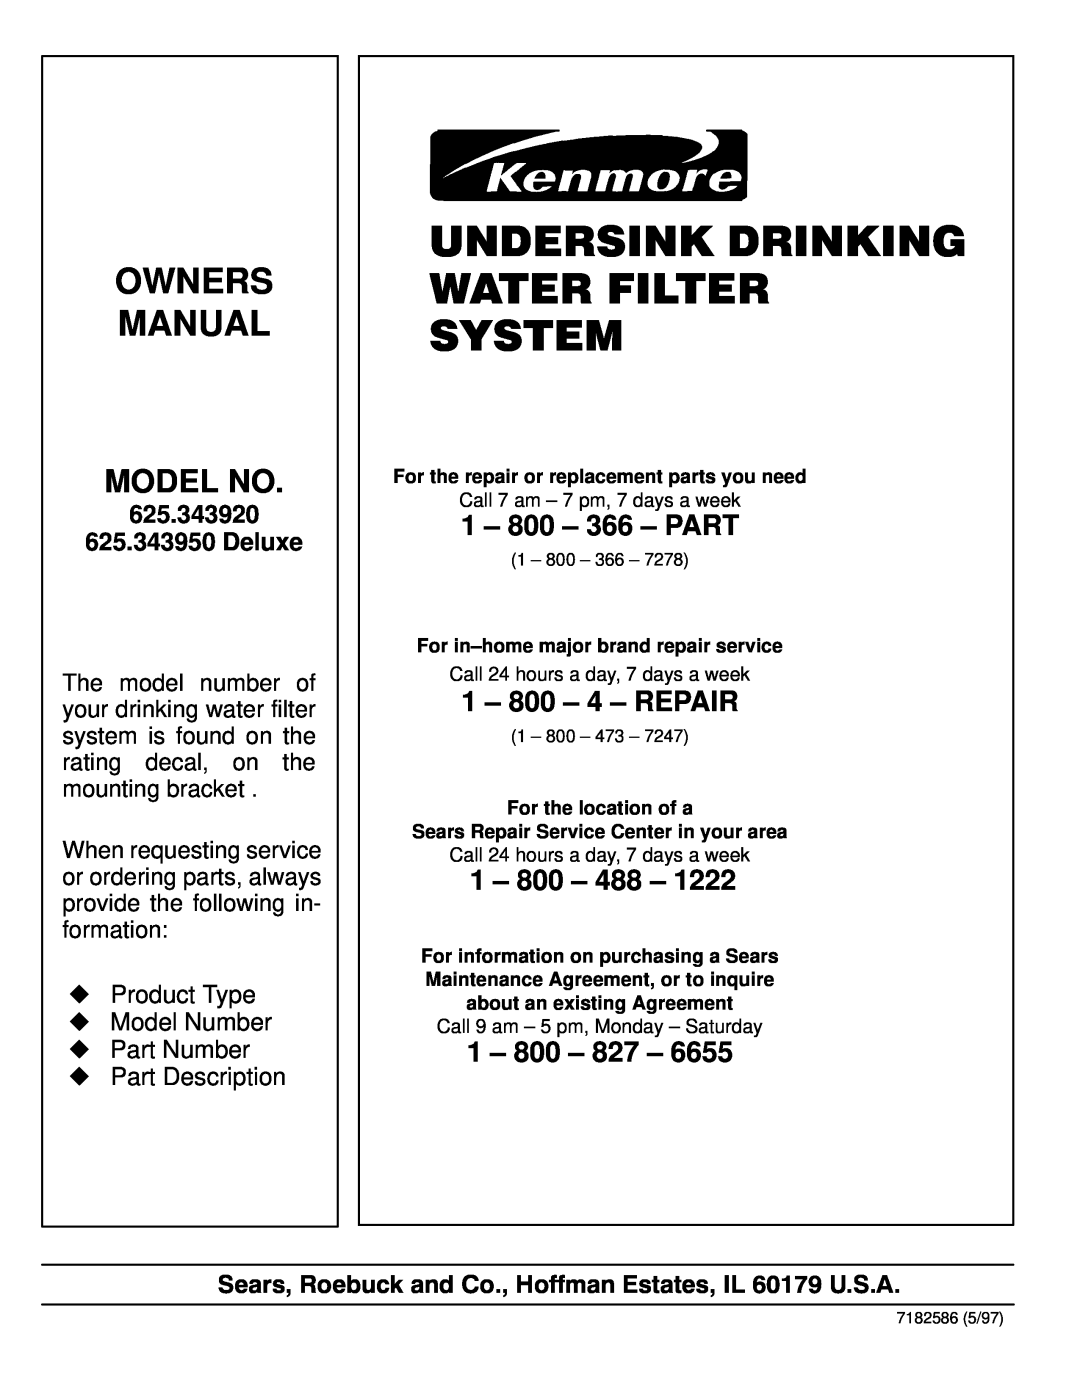 Kenmore Undersink Drinking Water Filter System, 625.343920 625.343950 Deluxe, zProduct Type zModel Number zPart Number 